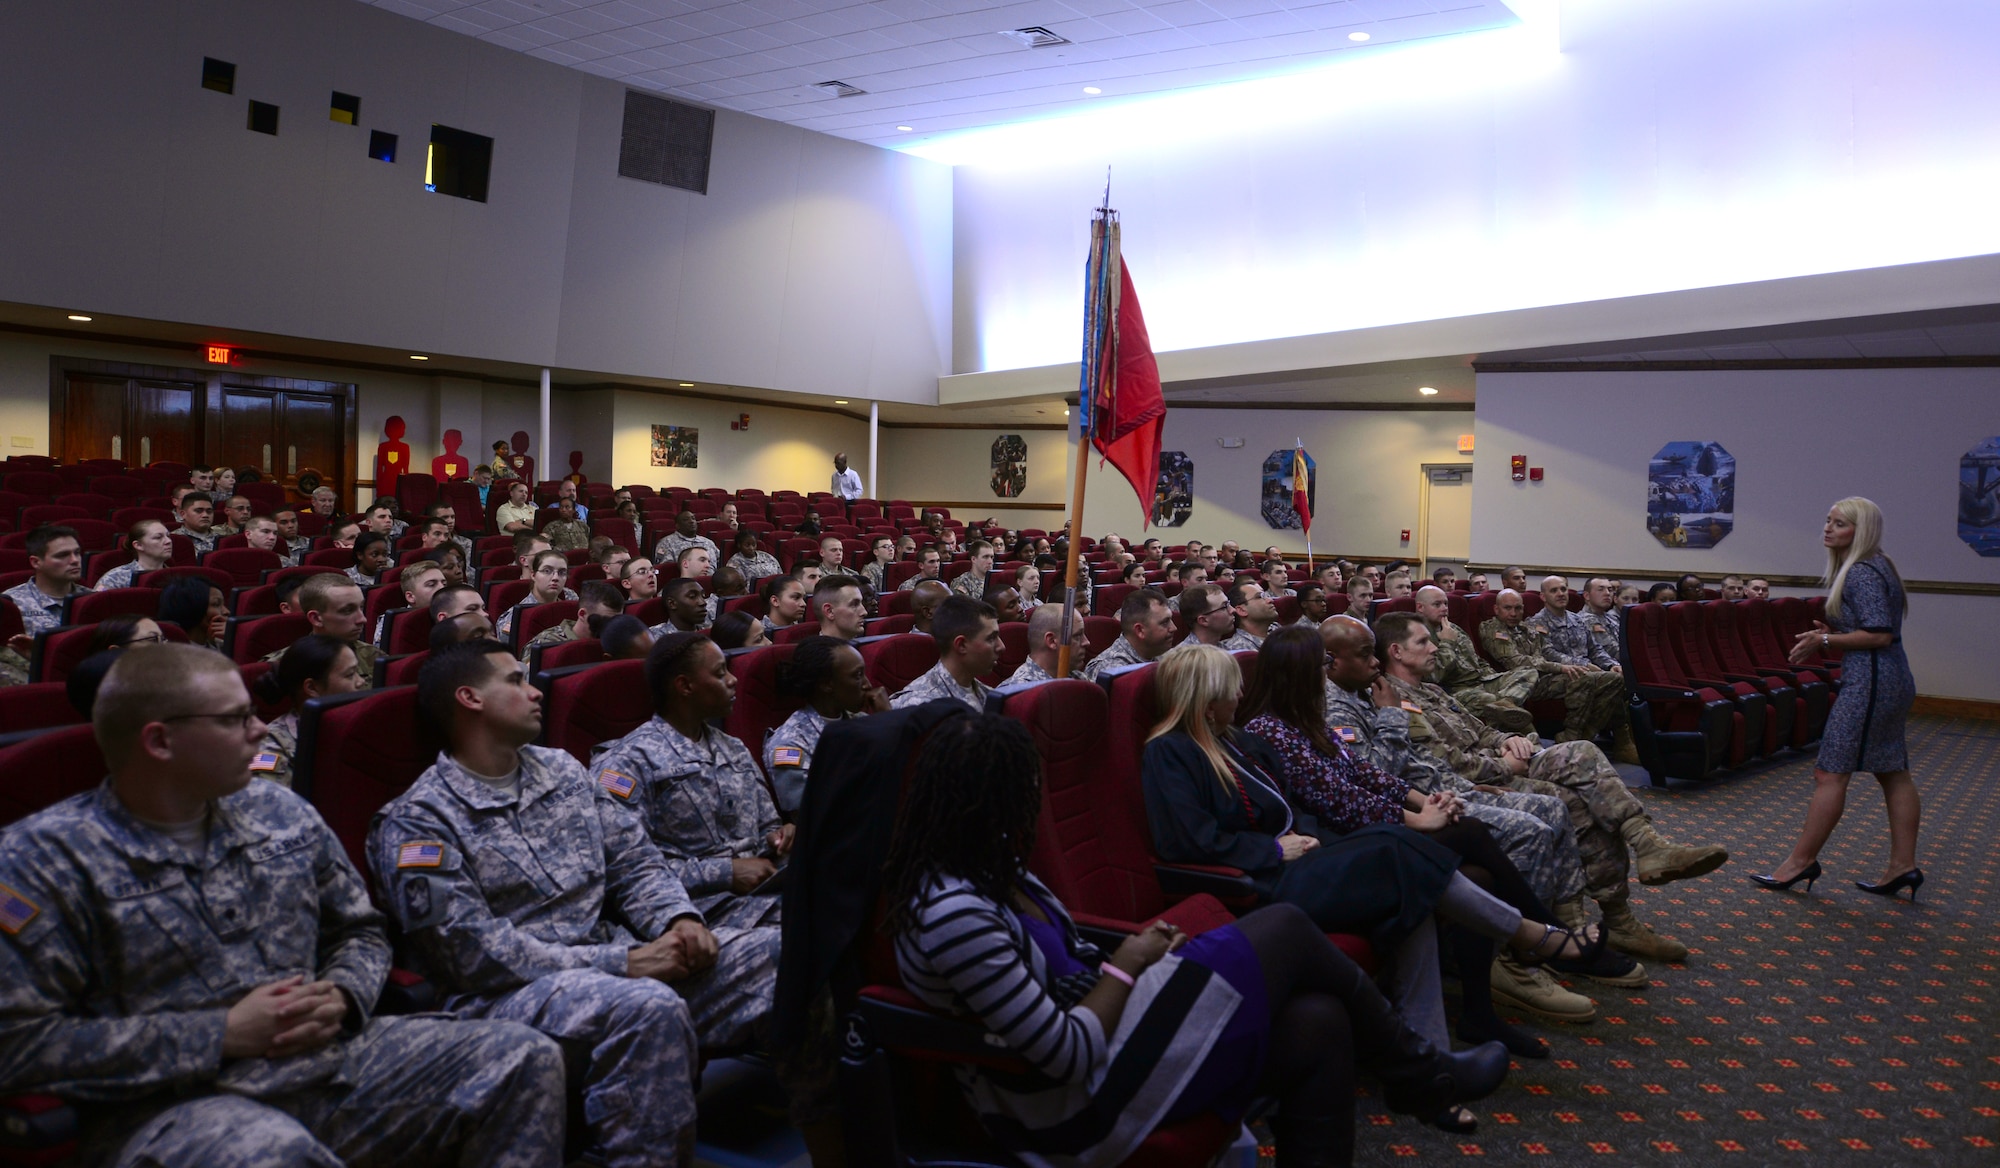 U.S. Army Soldiers and civilians assigned to the 597th Transportation Brigade listen to A. J. Brandt, Joint Base Langley-Eustis, Va., Family Advocacy Outreach Manager, speak about Domestic Violence Awareness Month at Fort Eustis, Va., Oct. 21, 2015. Family advocacy staff held numerous prevention education briefings and events surrounding the topic of domestic violence. (U.S. Air Force photo by Senior Airman Aubrey White/Released)